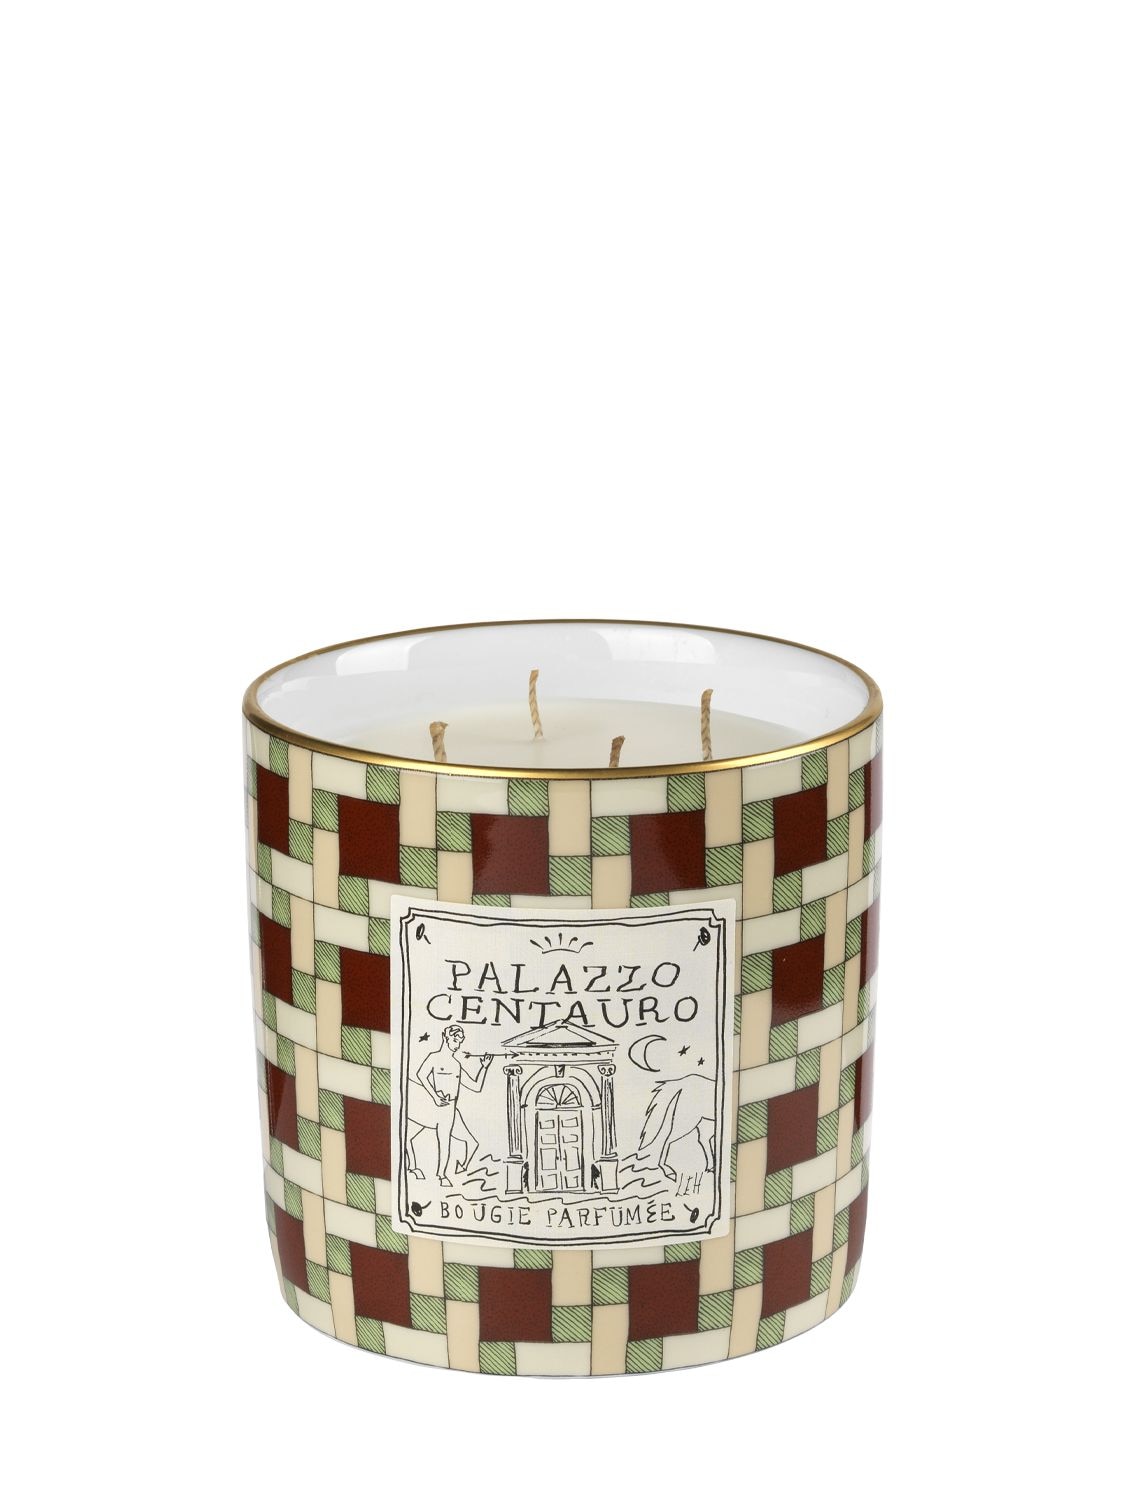 Image of Palazzo Centauro Large Scented Candle